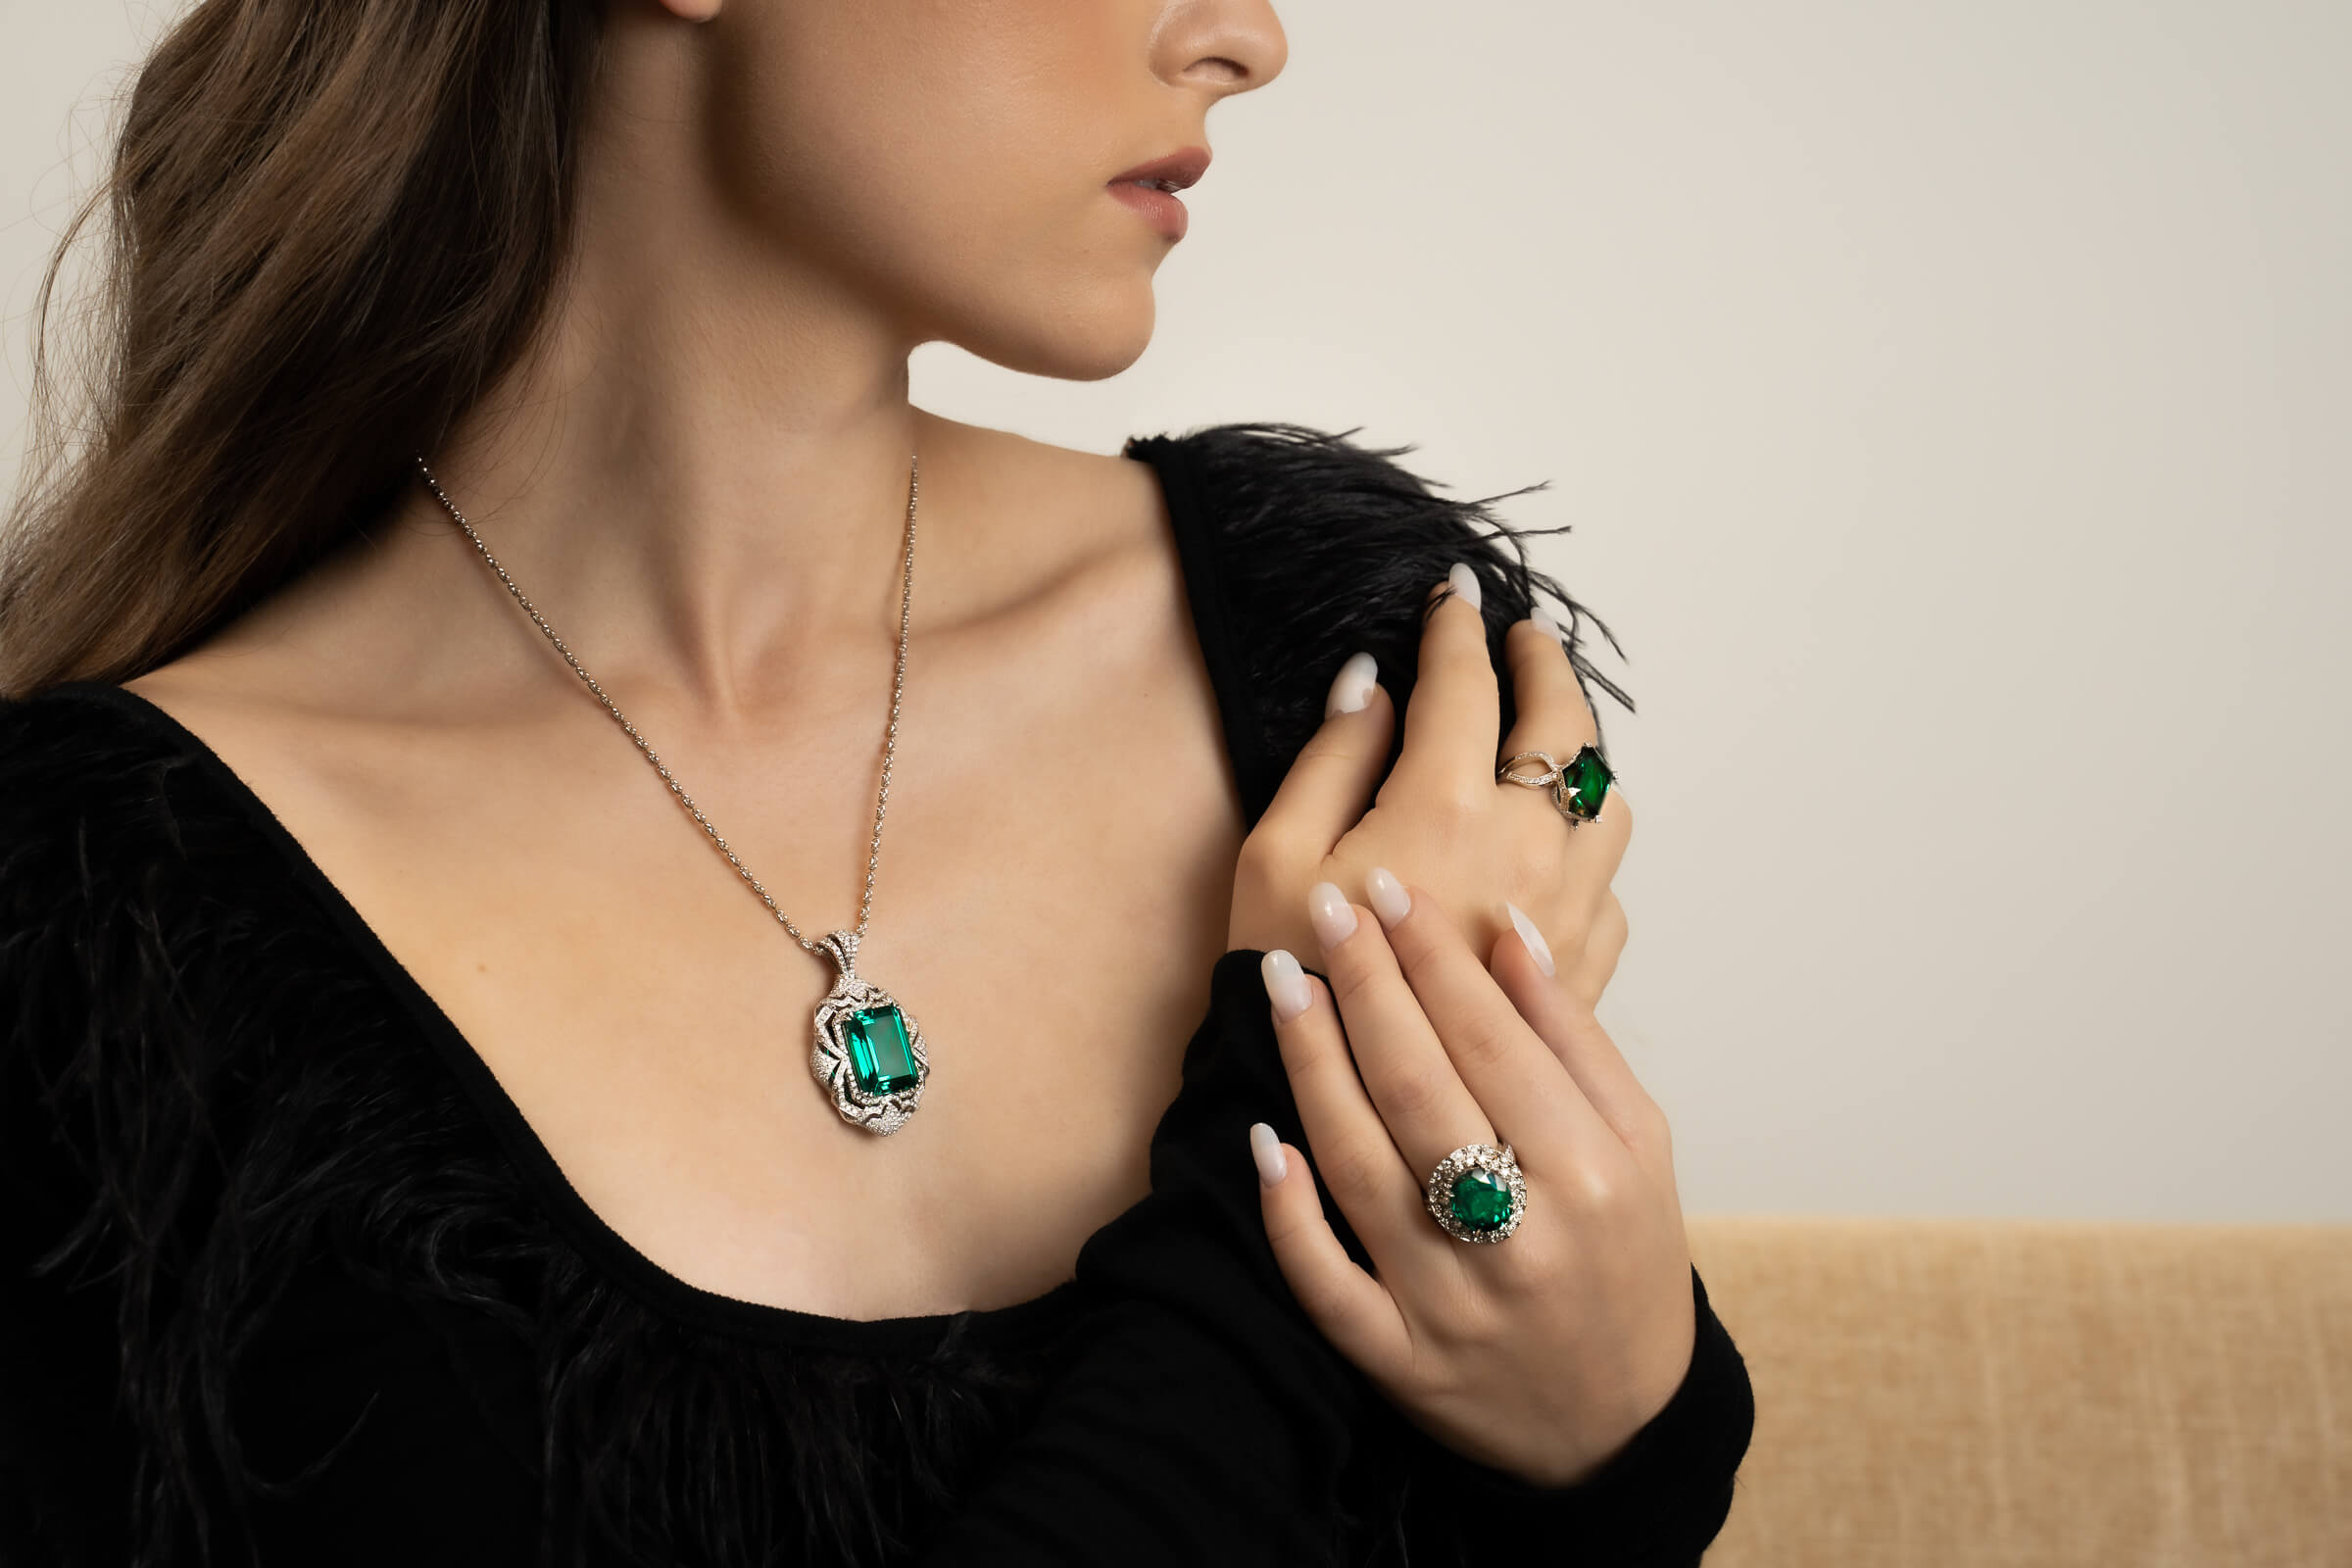 Woman wearing emerald rings and necklace